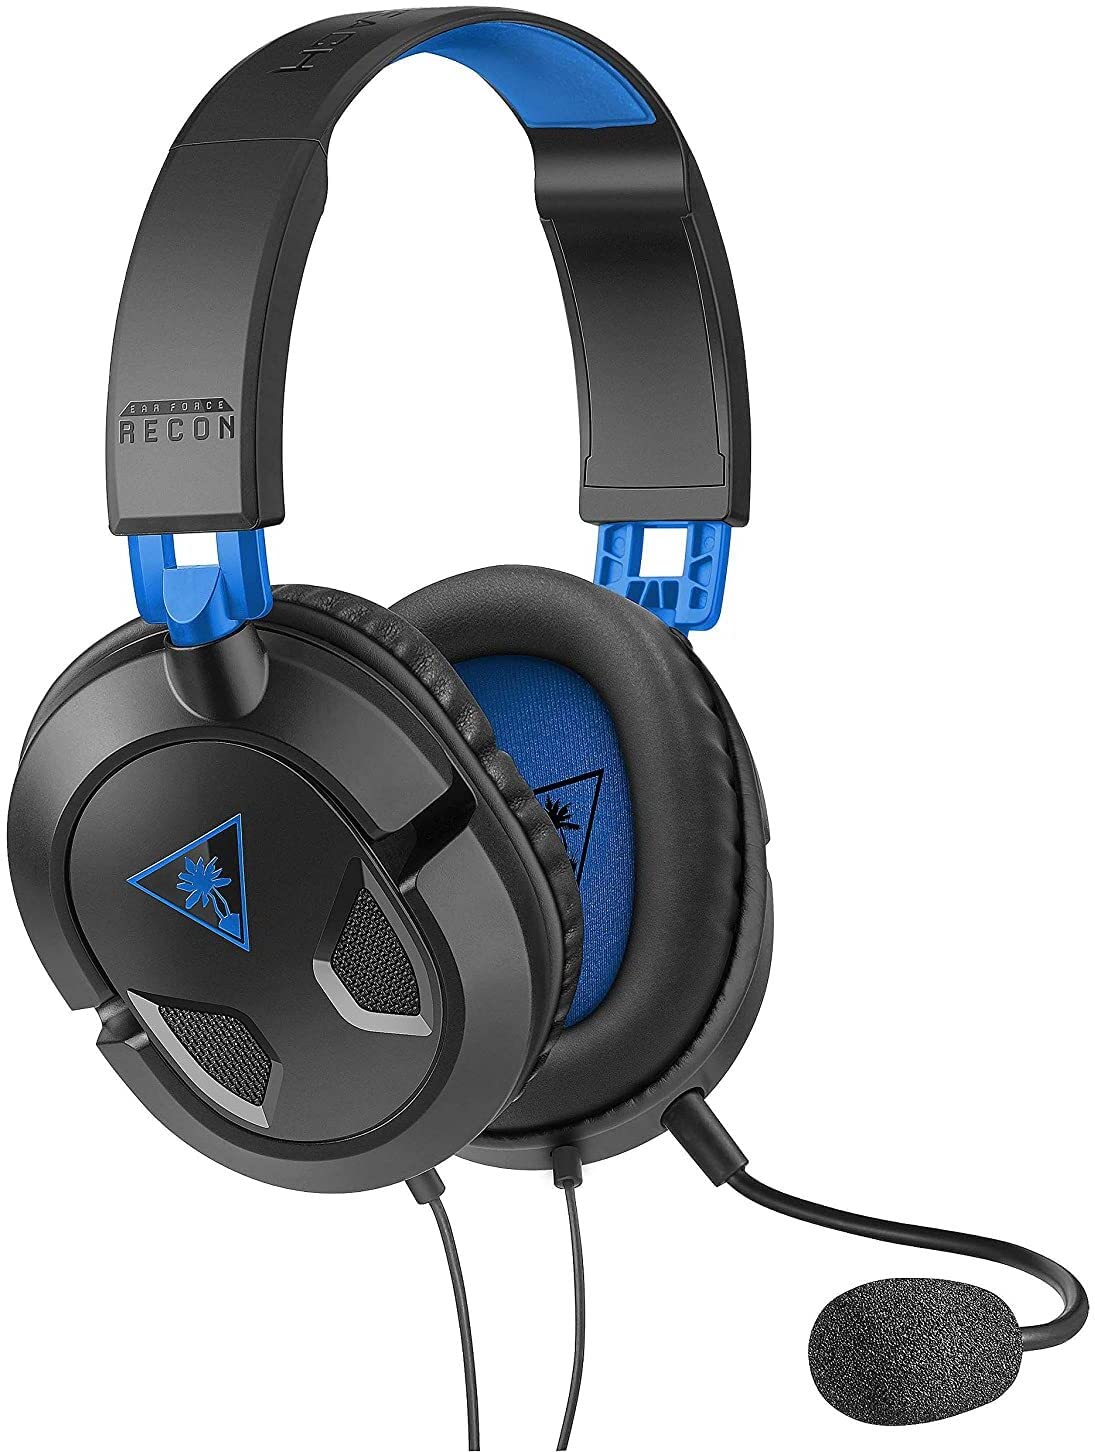 Turtle Beach Recon 50P Wired Gaming Headset - (PS5) PlayStation 5 Accessories Turtle Beach   